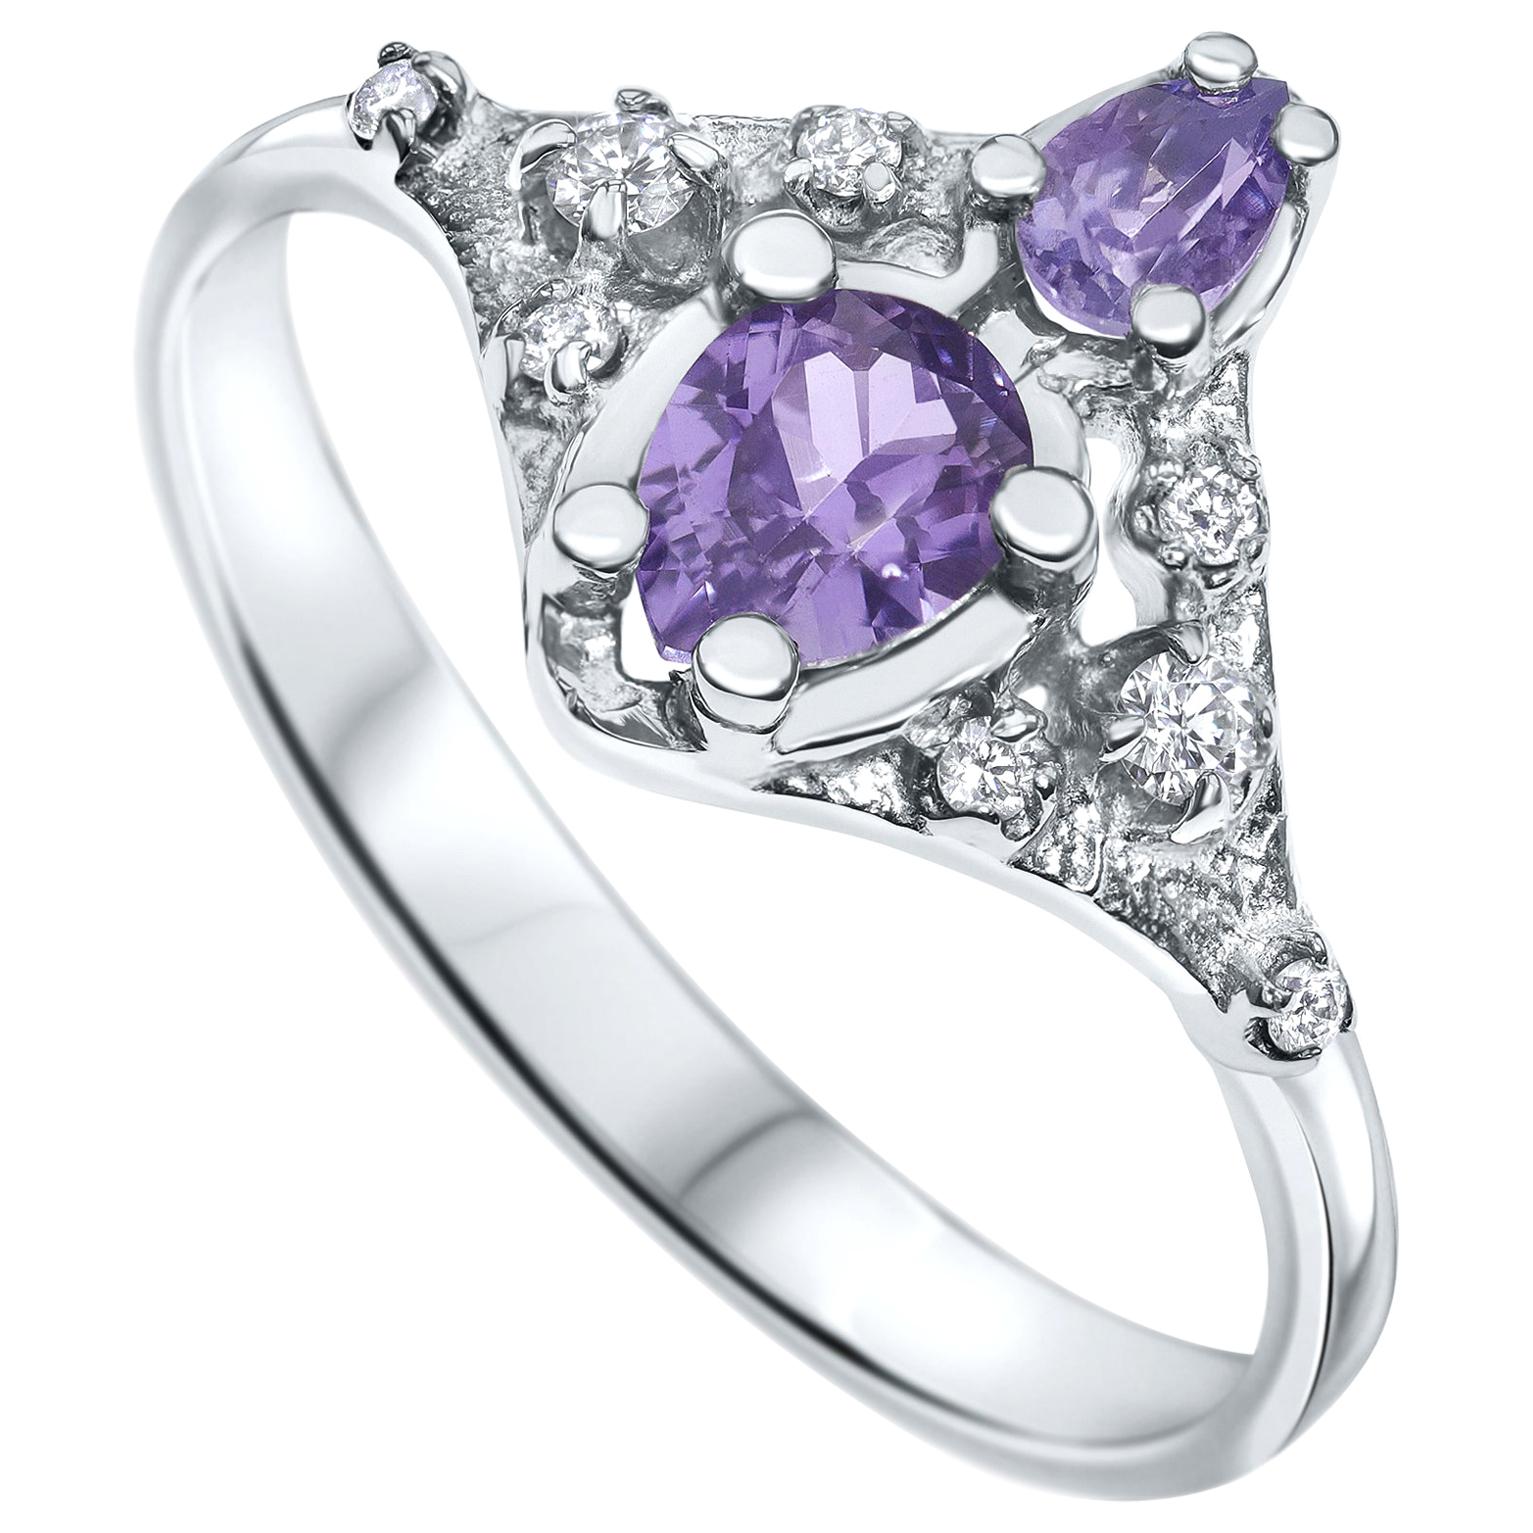 0.70 Carat Natural Lilac Sapphire and Real Diamonds Ring in 14K White Gold